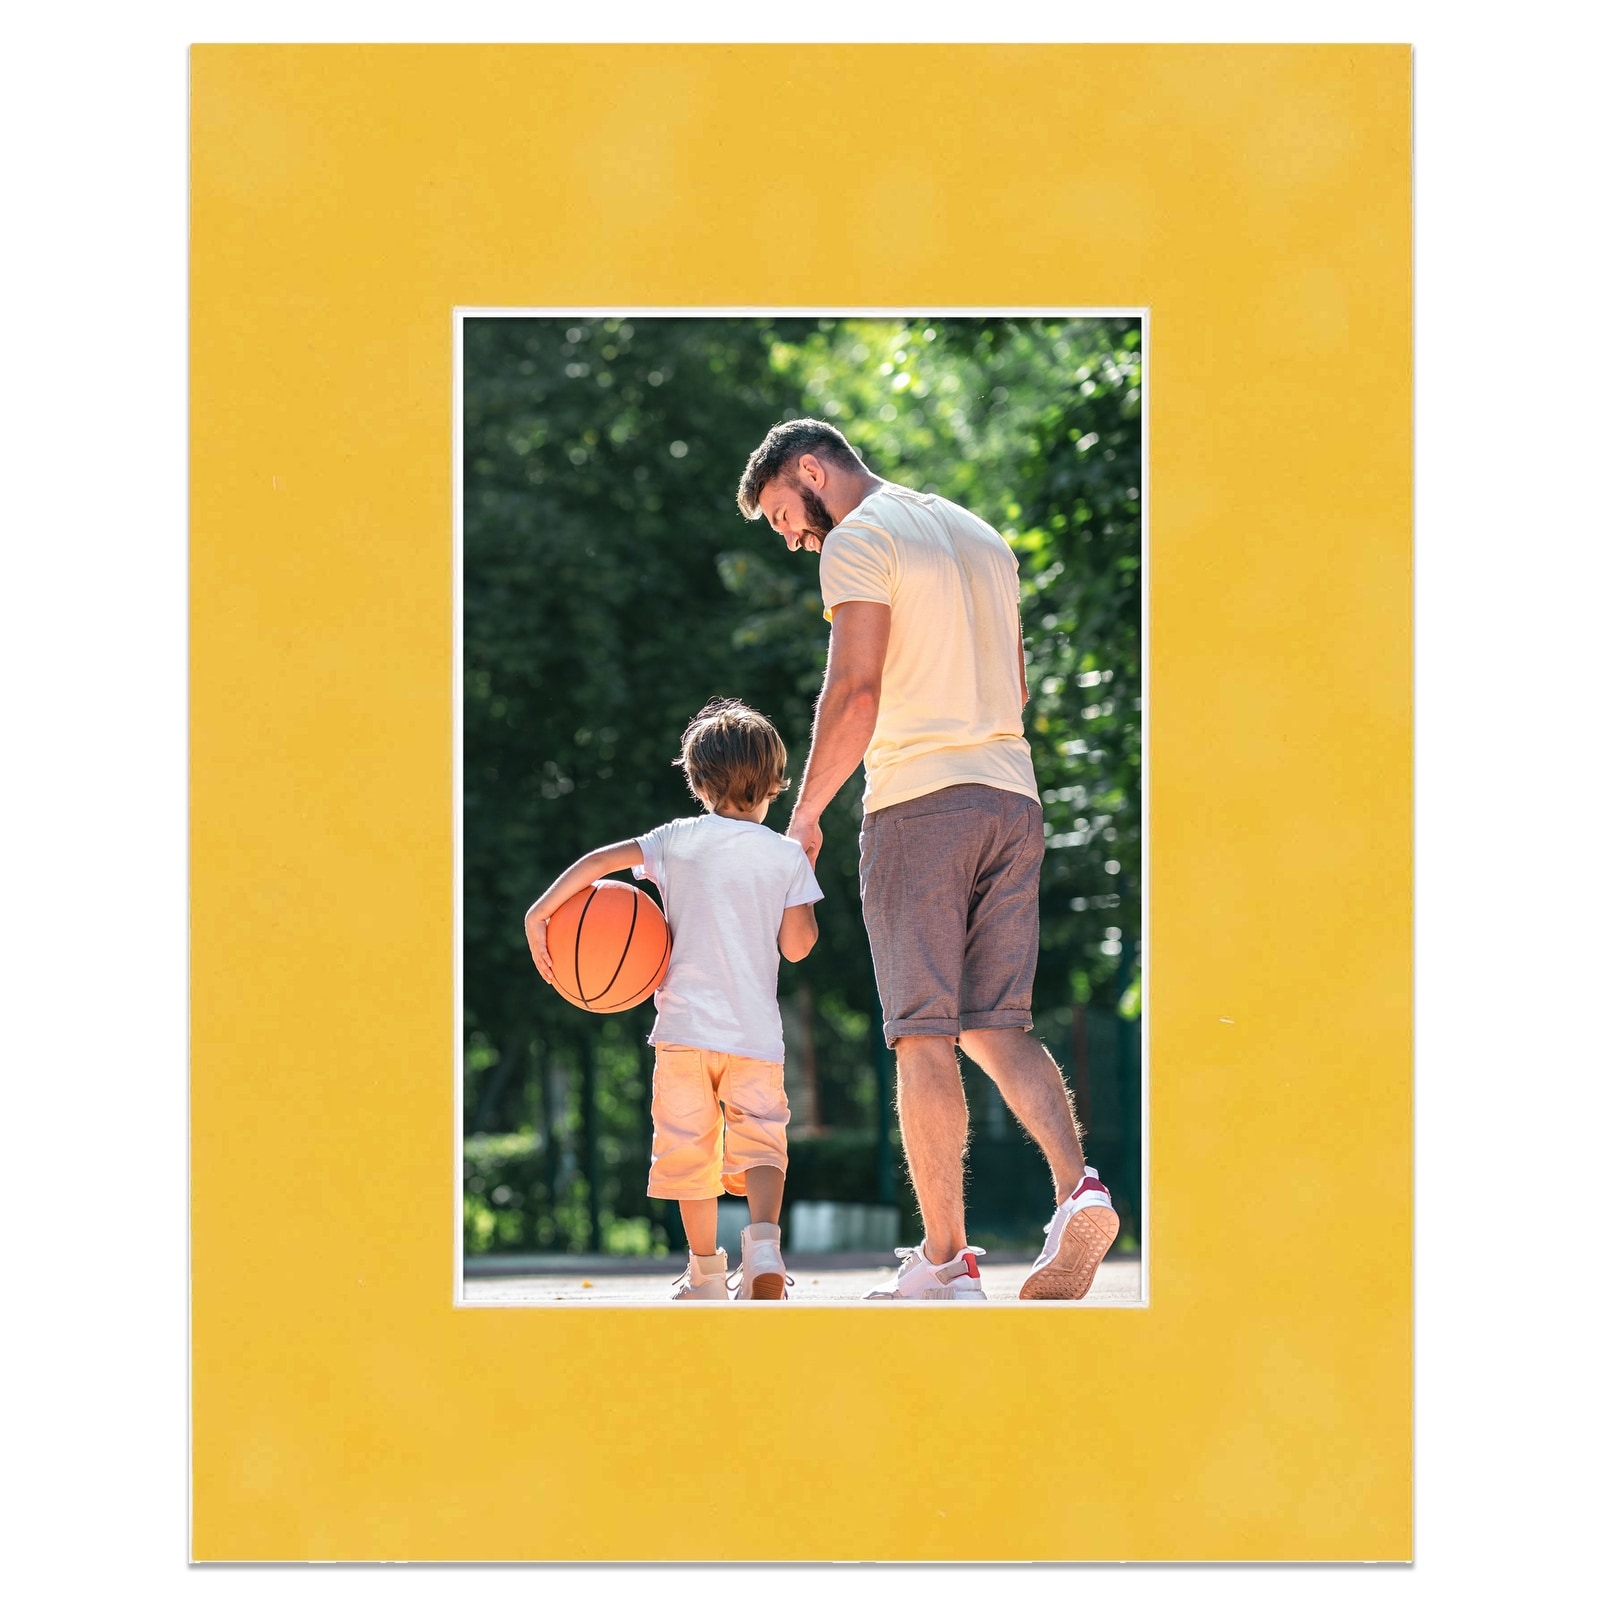 8x10 Mat for 5x7 Photo - Precut Sunrise Yellow Suede Picture Matboard for  Frames Measuring 8 x 10 Inches - Bevel Cut Matte to Display Art Measuring 5